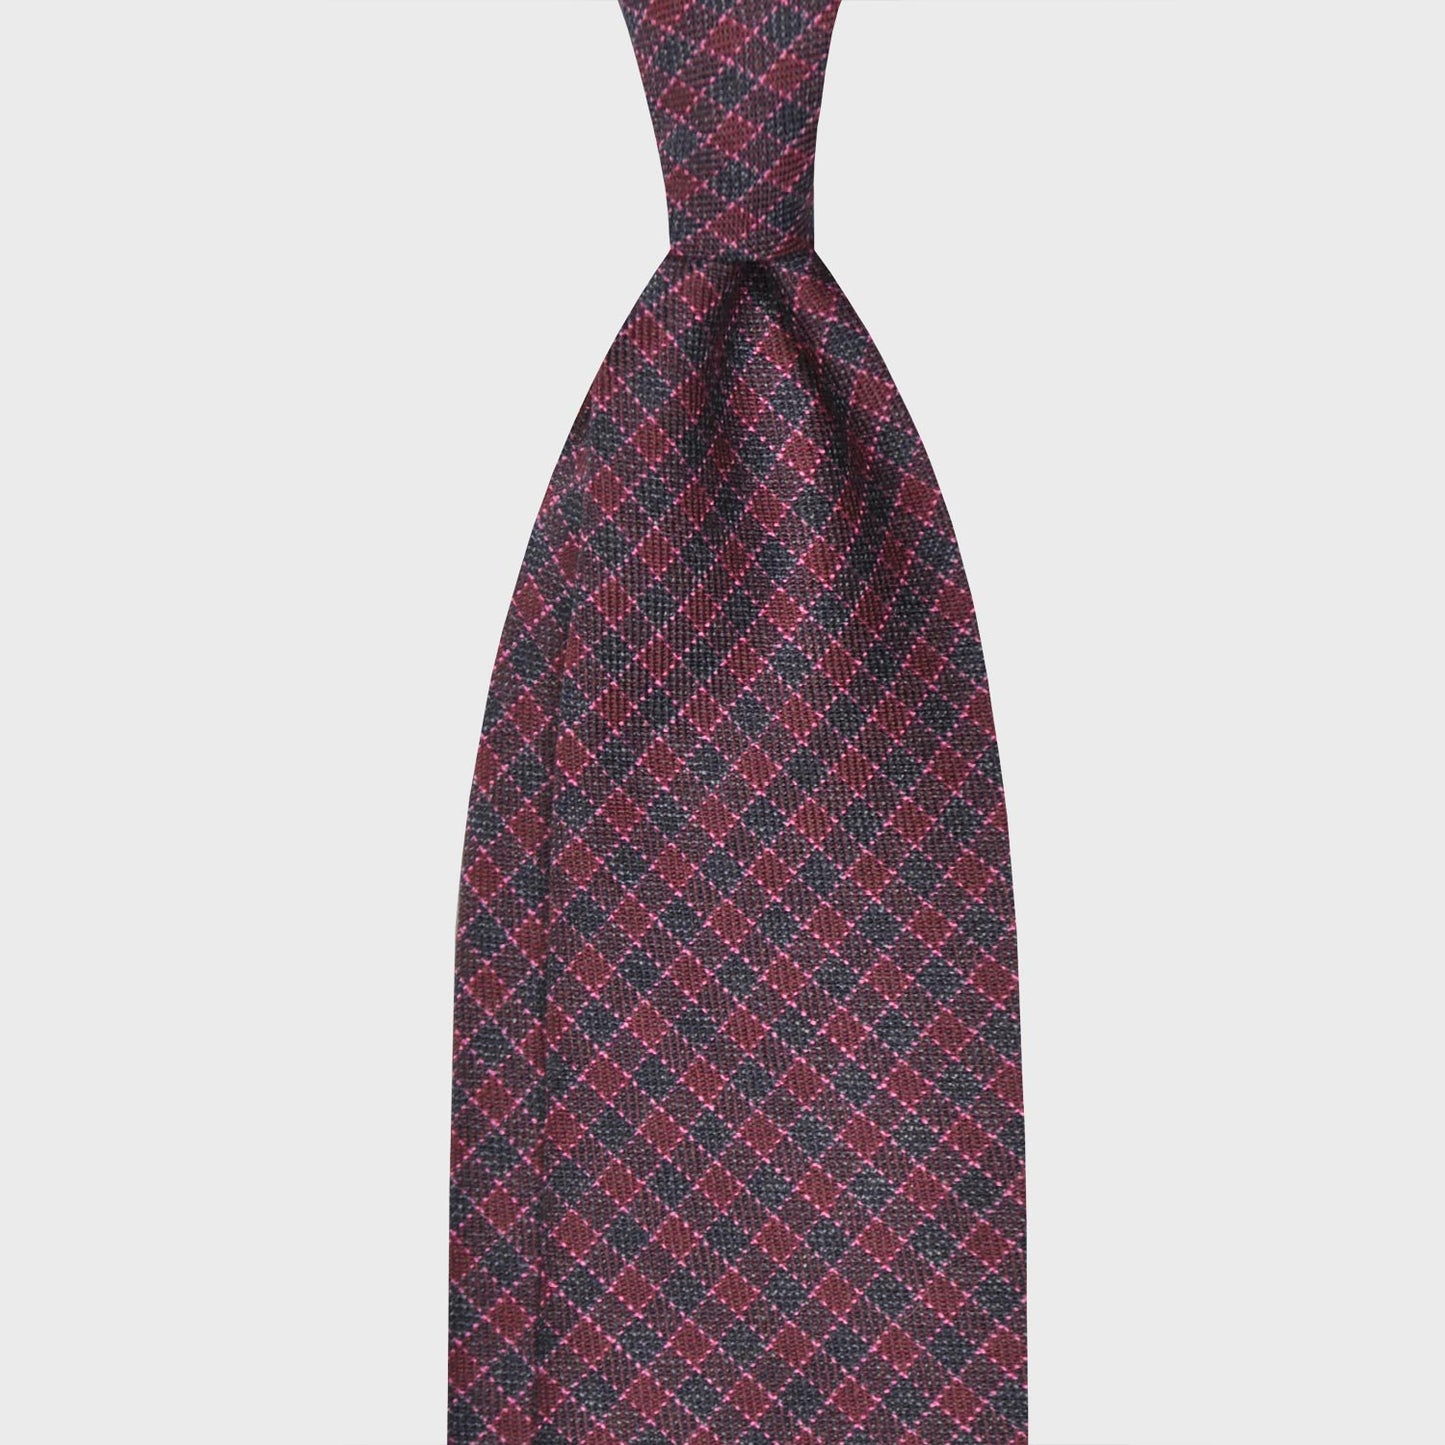 Burgundy Micro Checked Tie Holland&Sherry Wool. Refined checked burgundy tie made with the Hollande & Sherry worsted wool, unlined 3 folds, handmade tie F.Marino Napoli for Wools Boutique Uomo